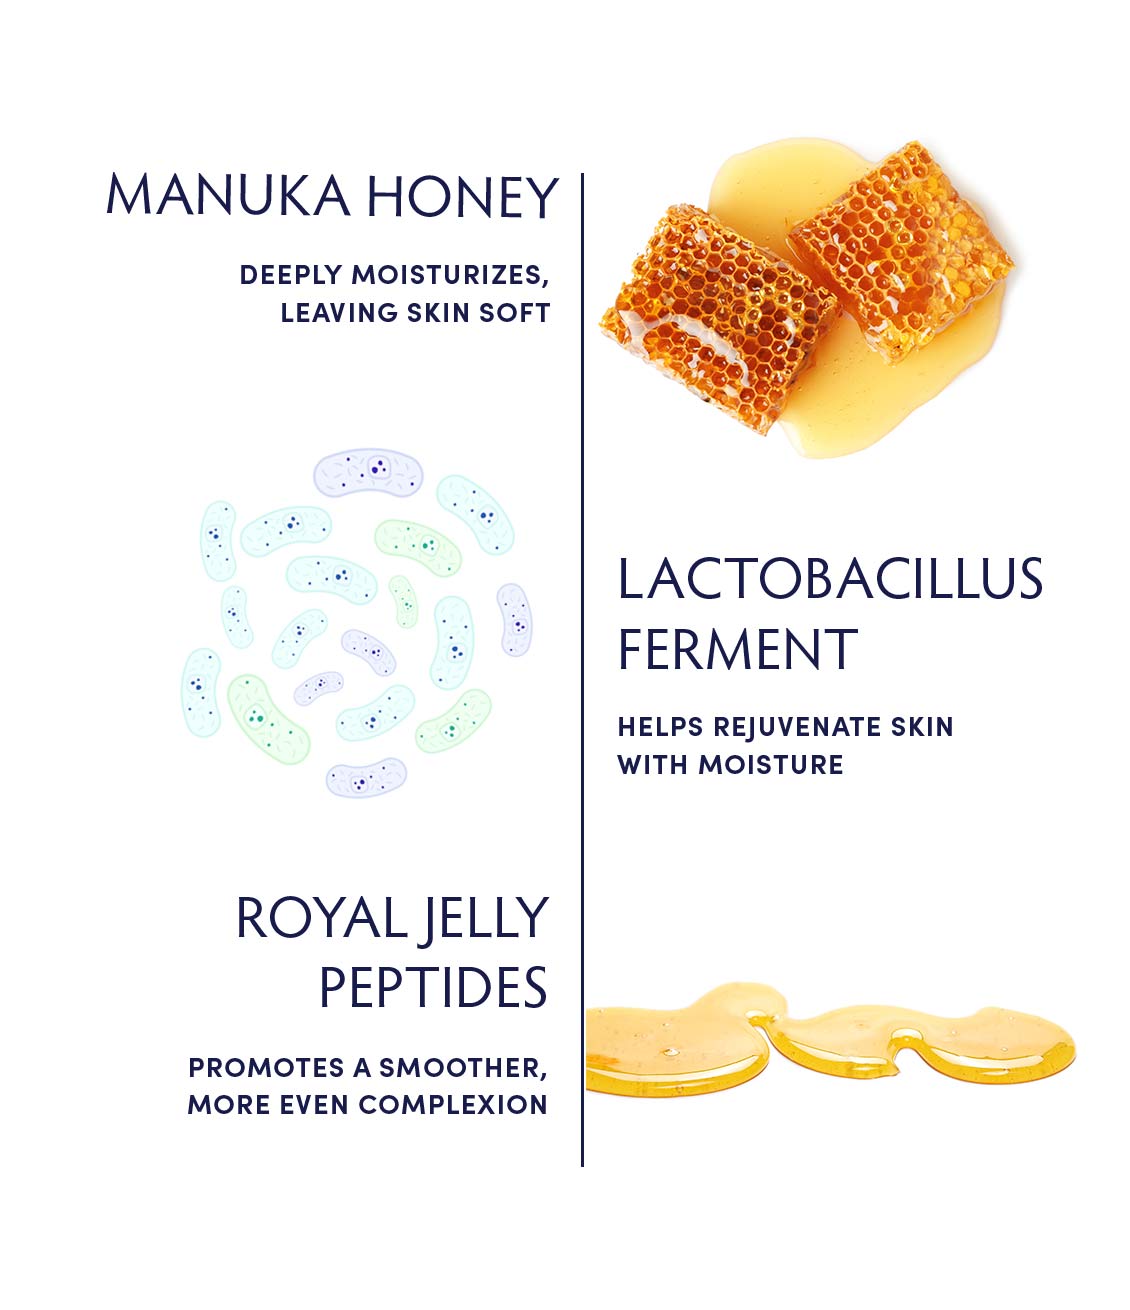 Manuka Honey Oil Cleanser (for face & body) now with PAPAYA SEED